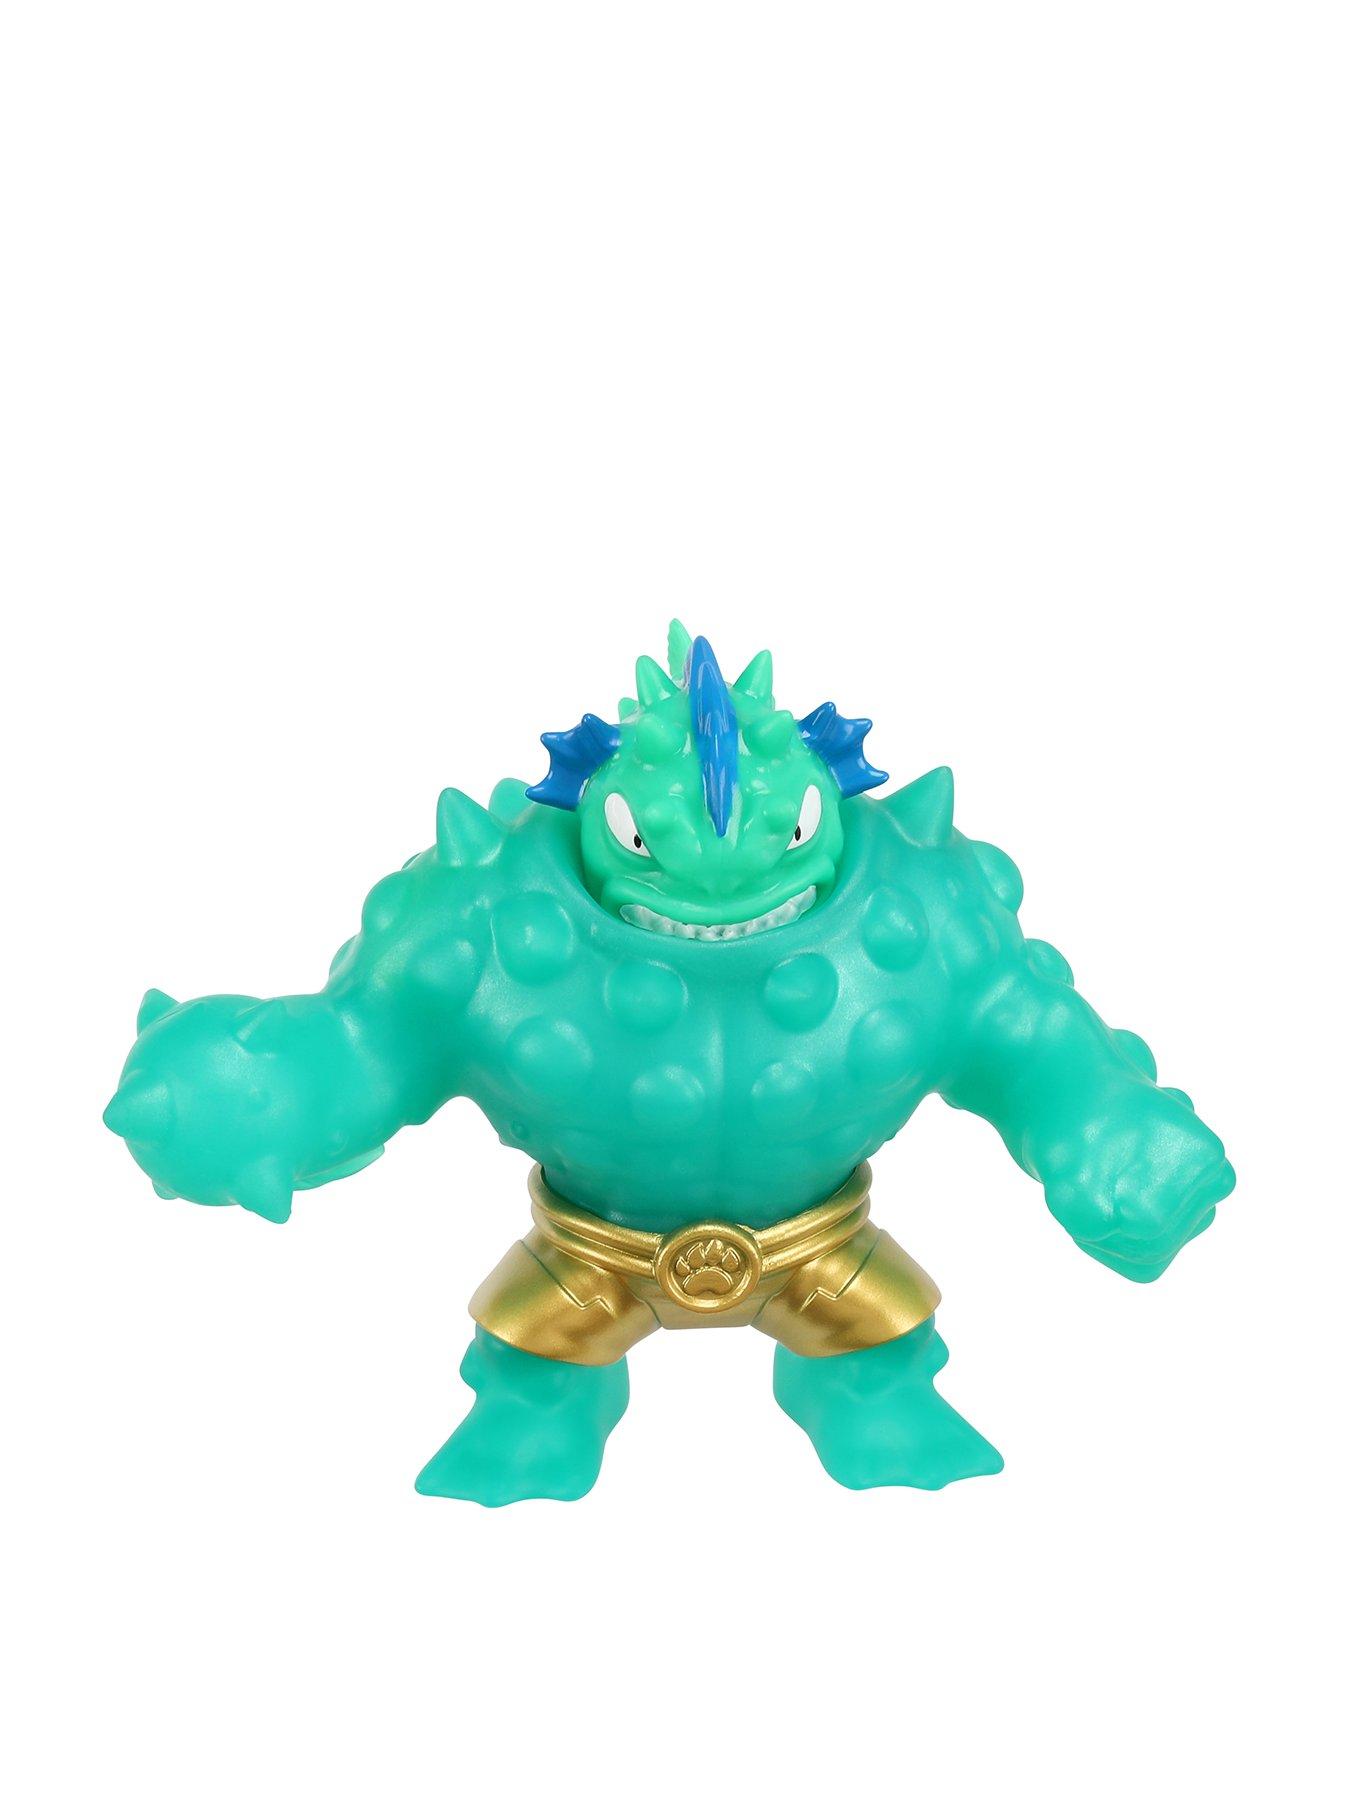 Heroes of Goo Jit Zu Deep Goo Sea Foogoo Hero Pack. Super Oozy, Goo Filled  Toy. with Head Butt Attack Feature. Stretch Him 3 Times His Size!